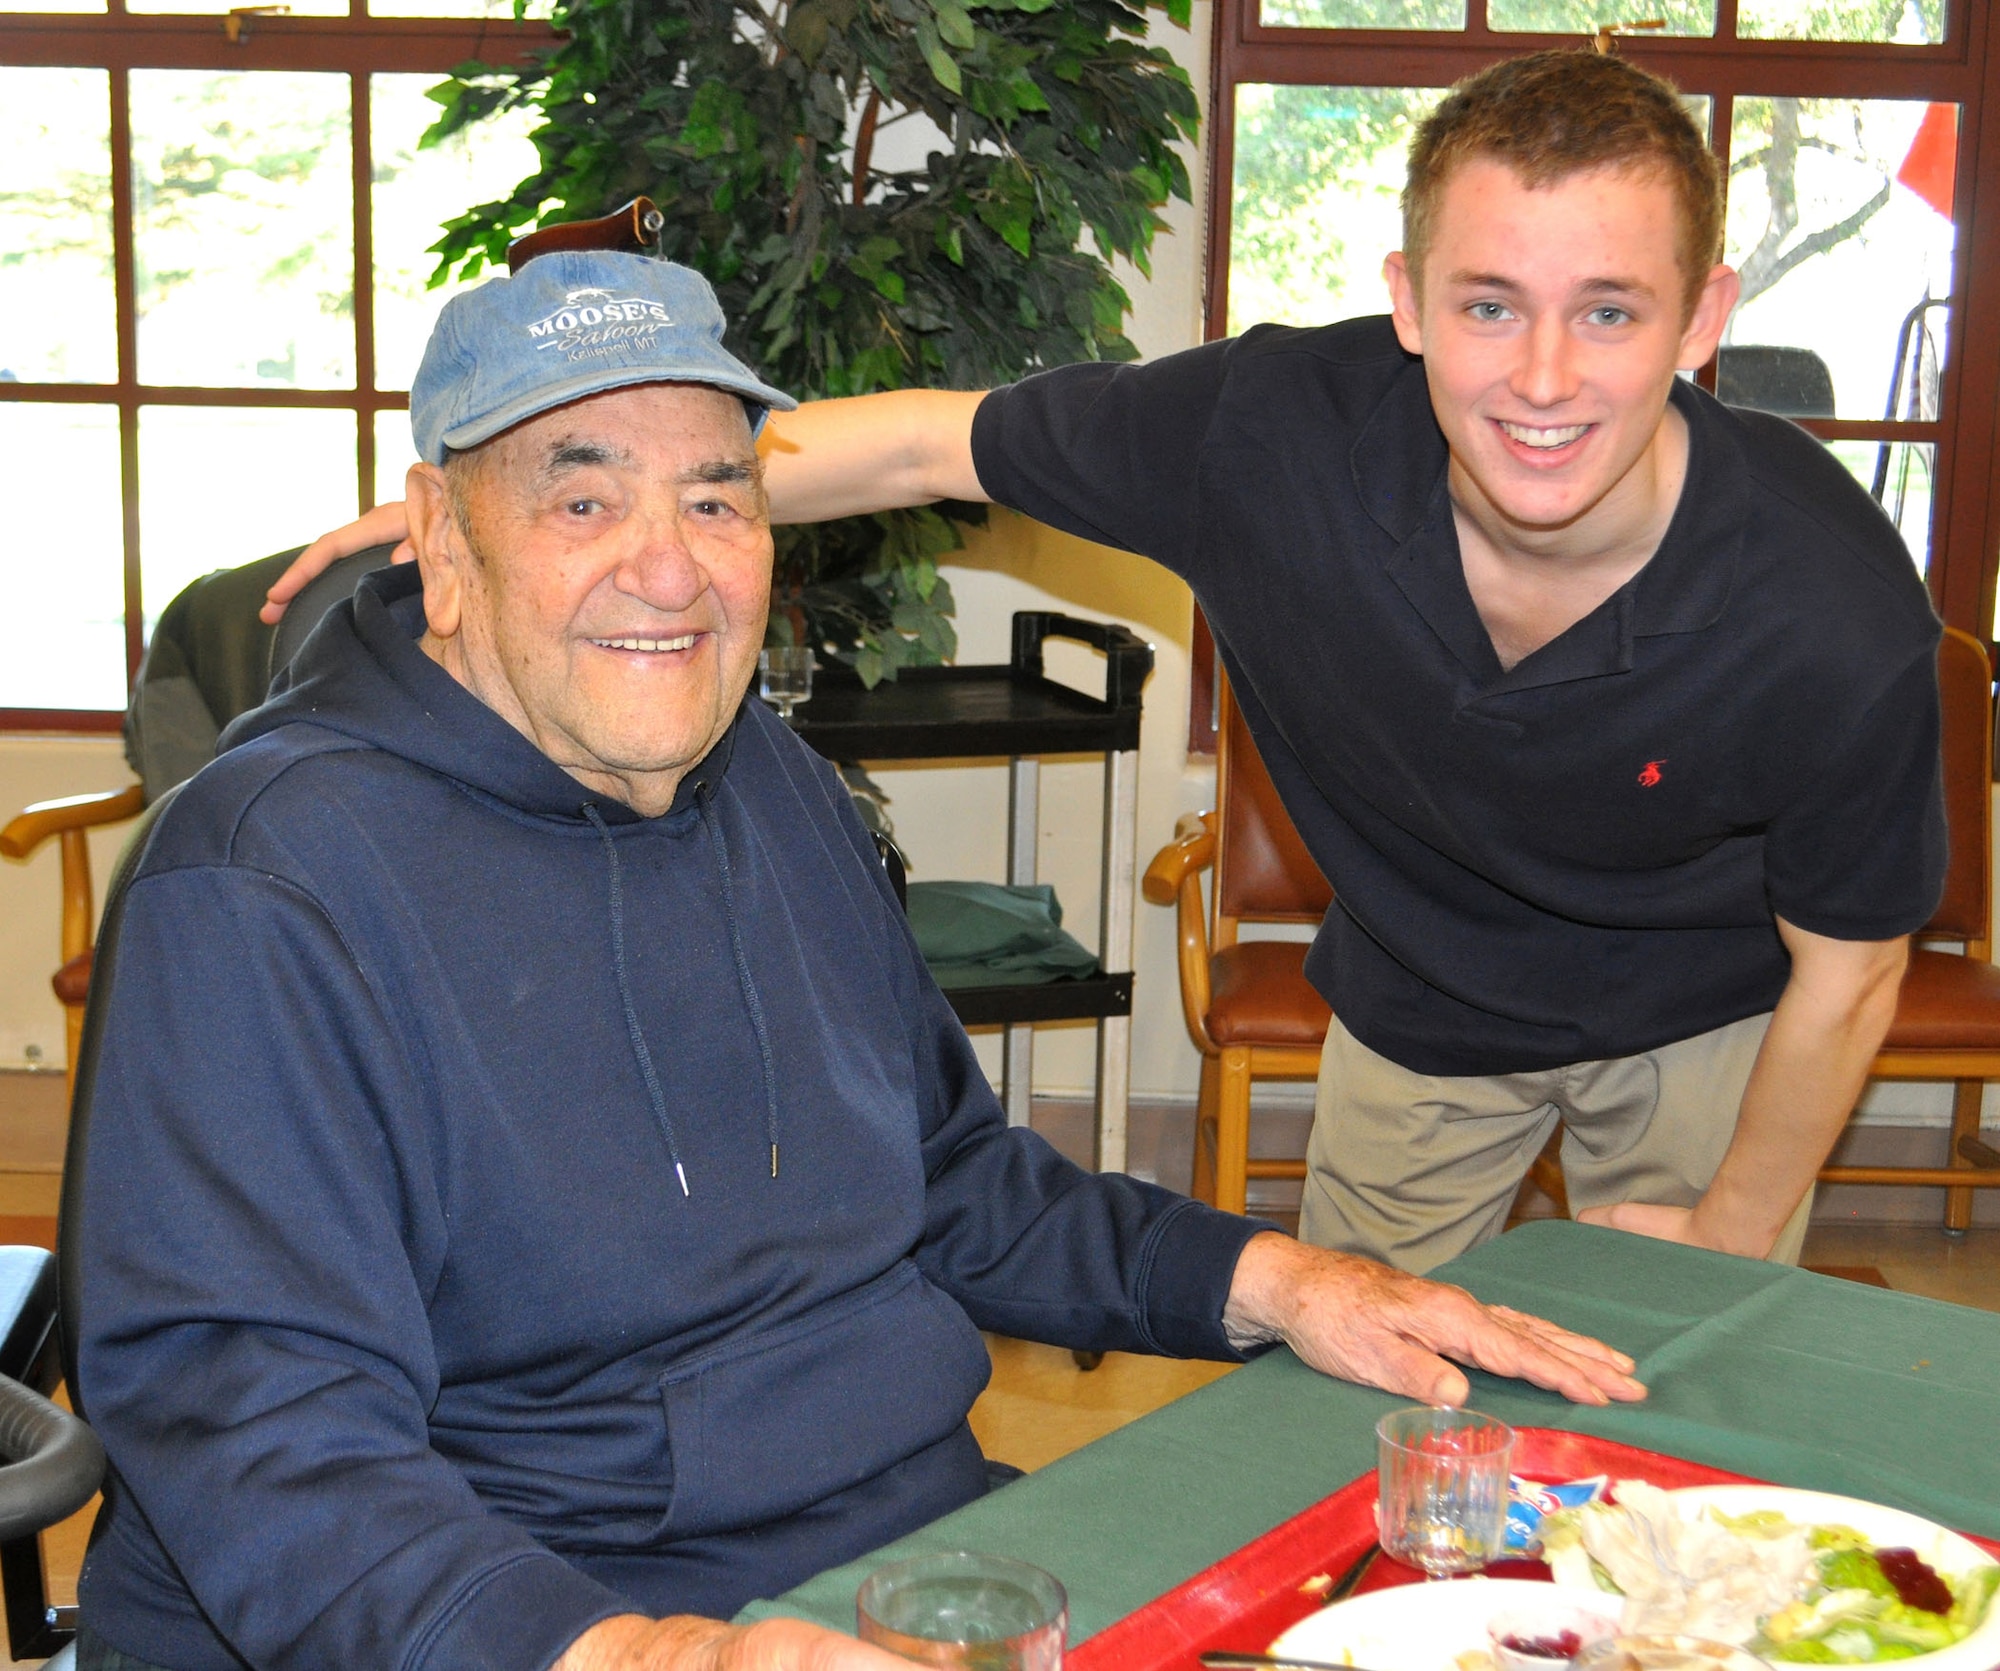 TRAVIS AIR FORCE BASE, Calif. --  Jake Burger, son of Col. Matt Burger, 349th AMW commander, visits with a veteran on Thanksgiving Day, at the California Veterans Home, Yountville. For a number of years, the wing has coordinated the serving and clean up of the holiday meal as a way to give back to our veterans, and visit with them, and their families. Jake is a junior at the University of Iowa. (U.S. Air Force photo/SMSgt. (ret) Ellen Hatfield)